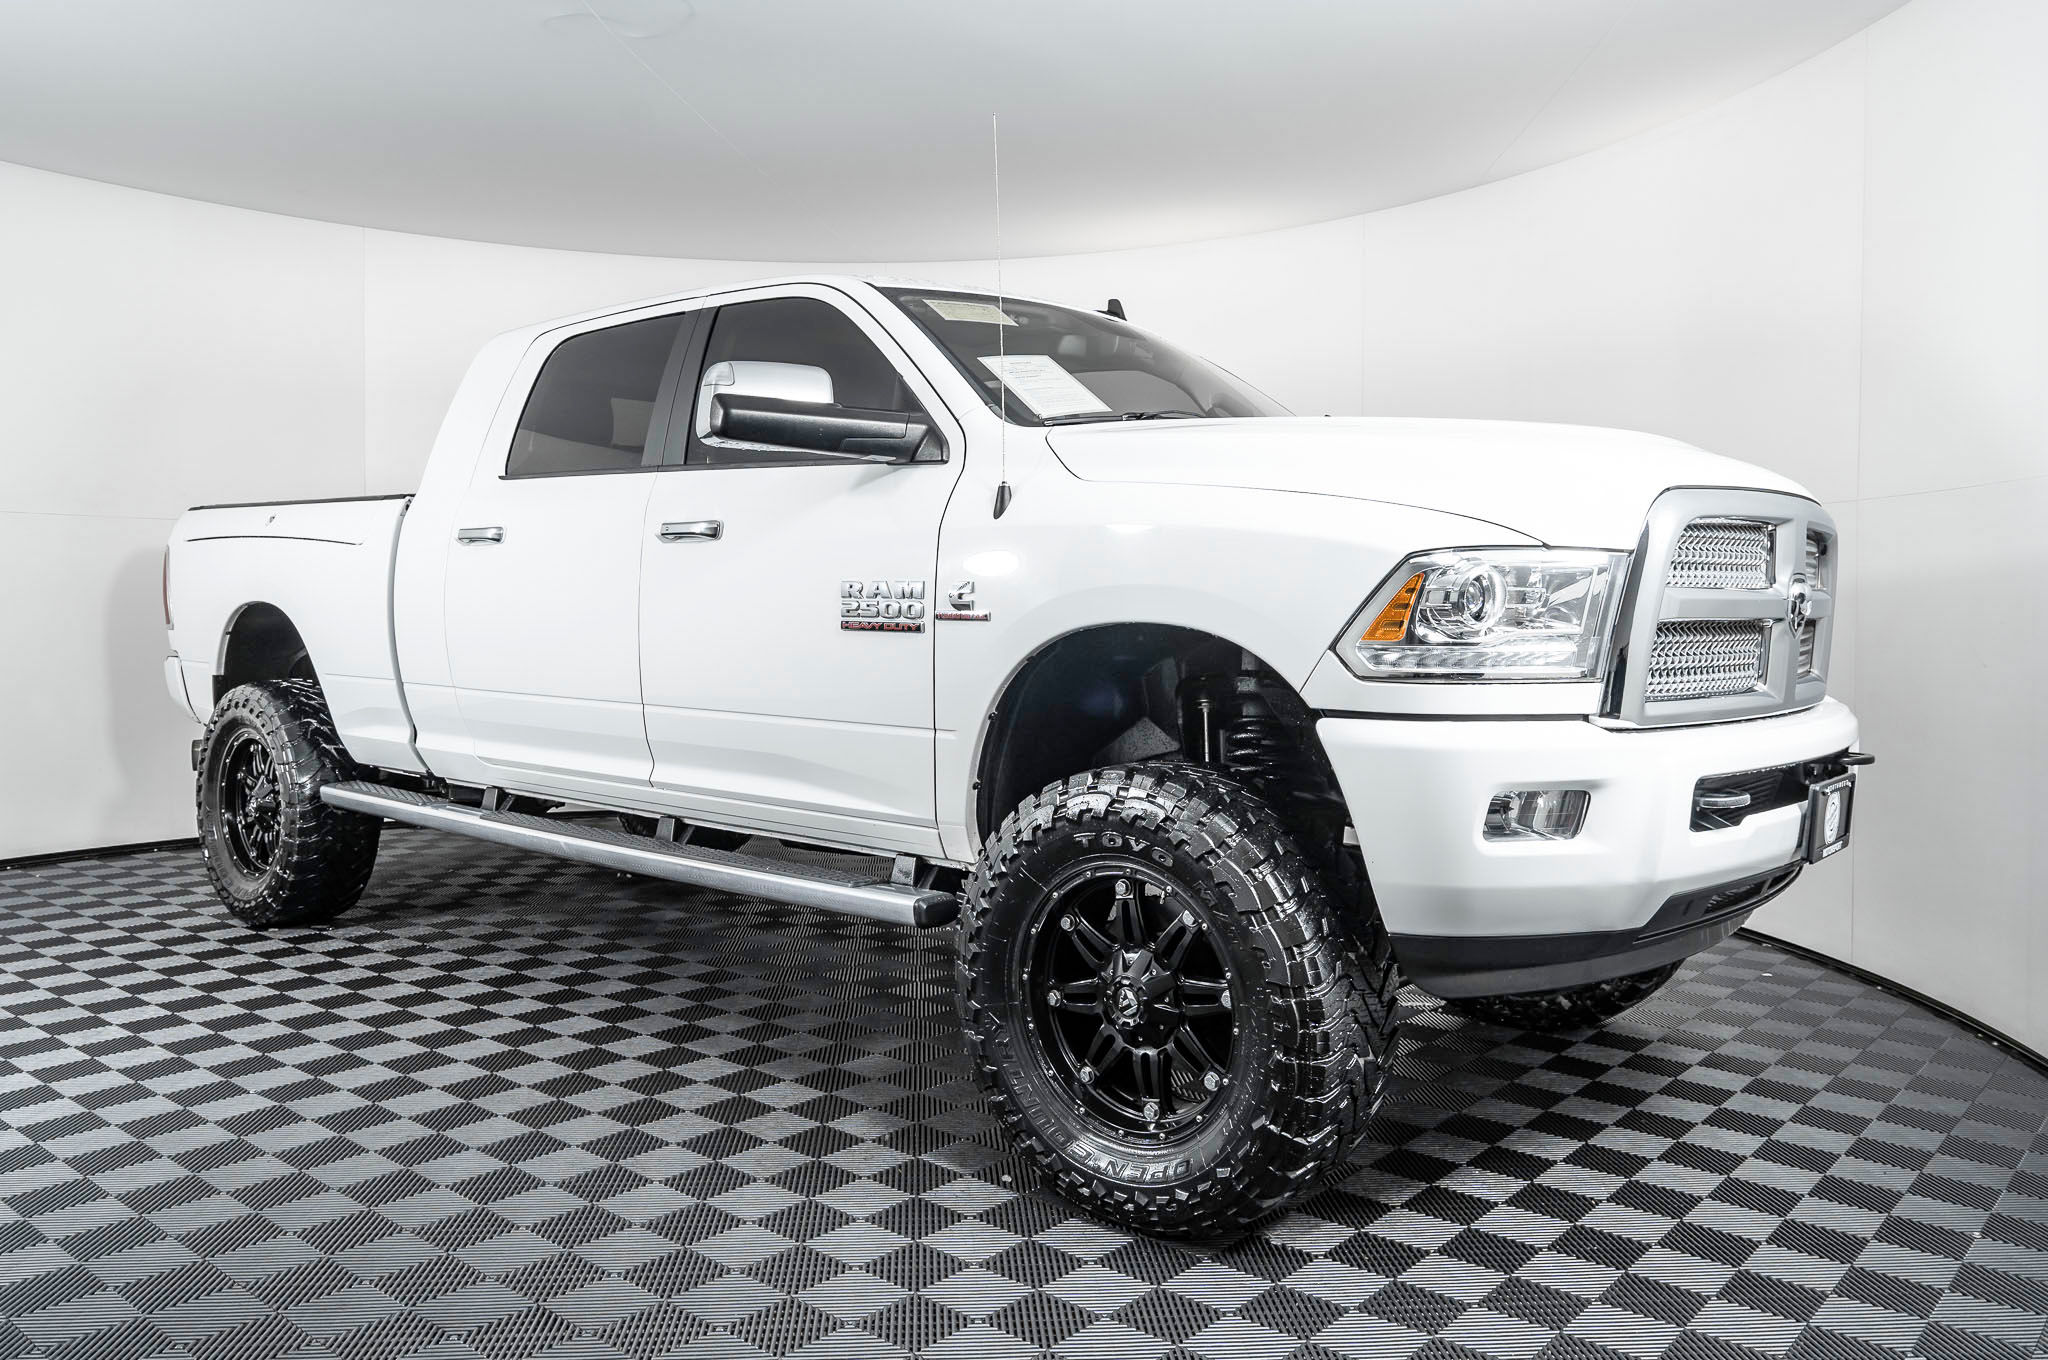 Used Lifted 2015 Dodge Ram 2500 HD Limited 4x4 Diesel Truck For Sale -  Northwest Motorsport